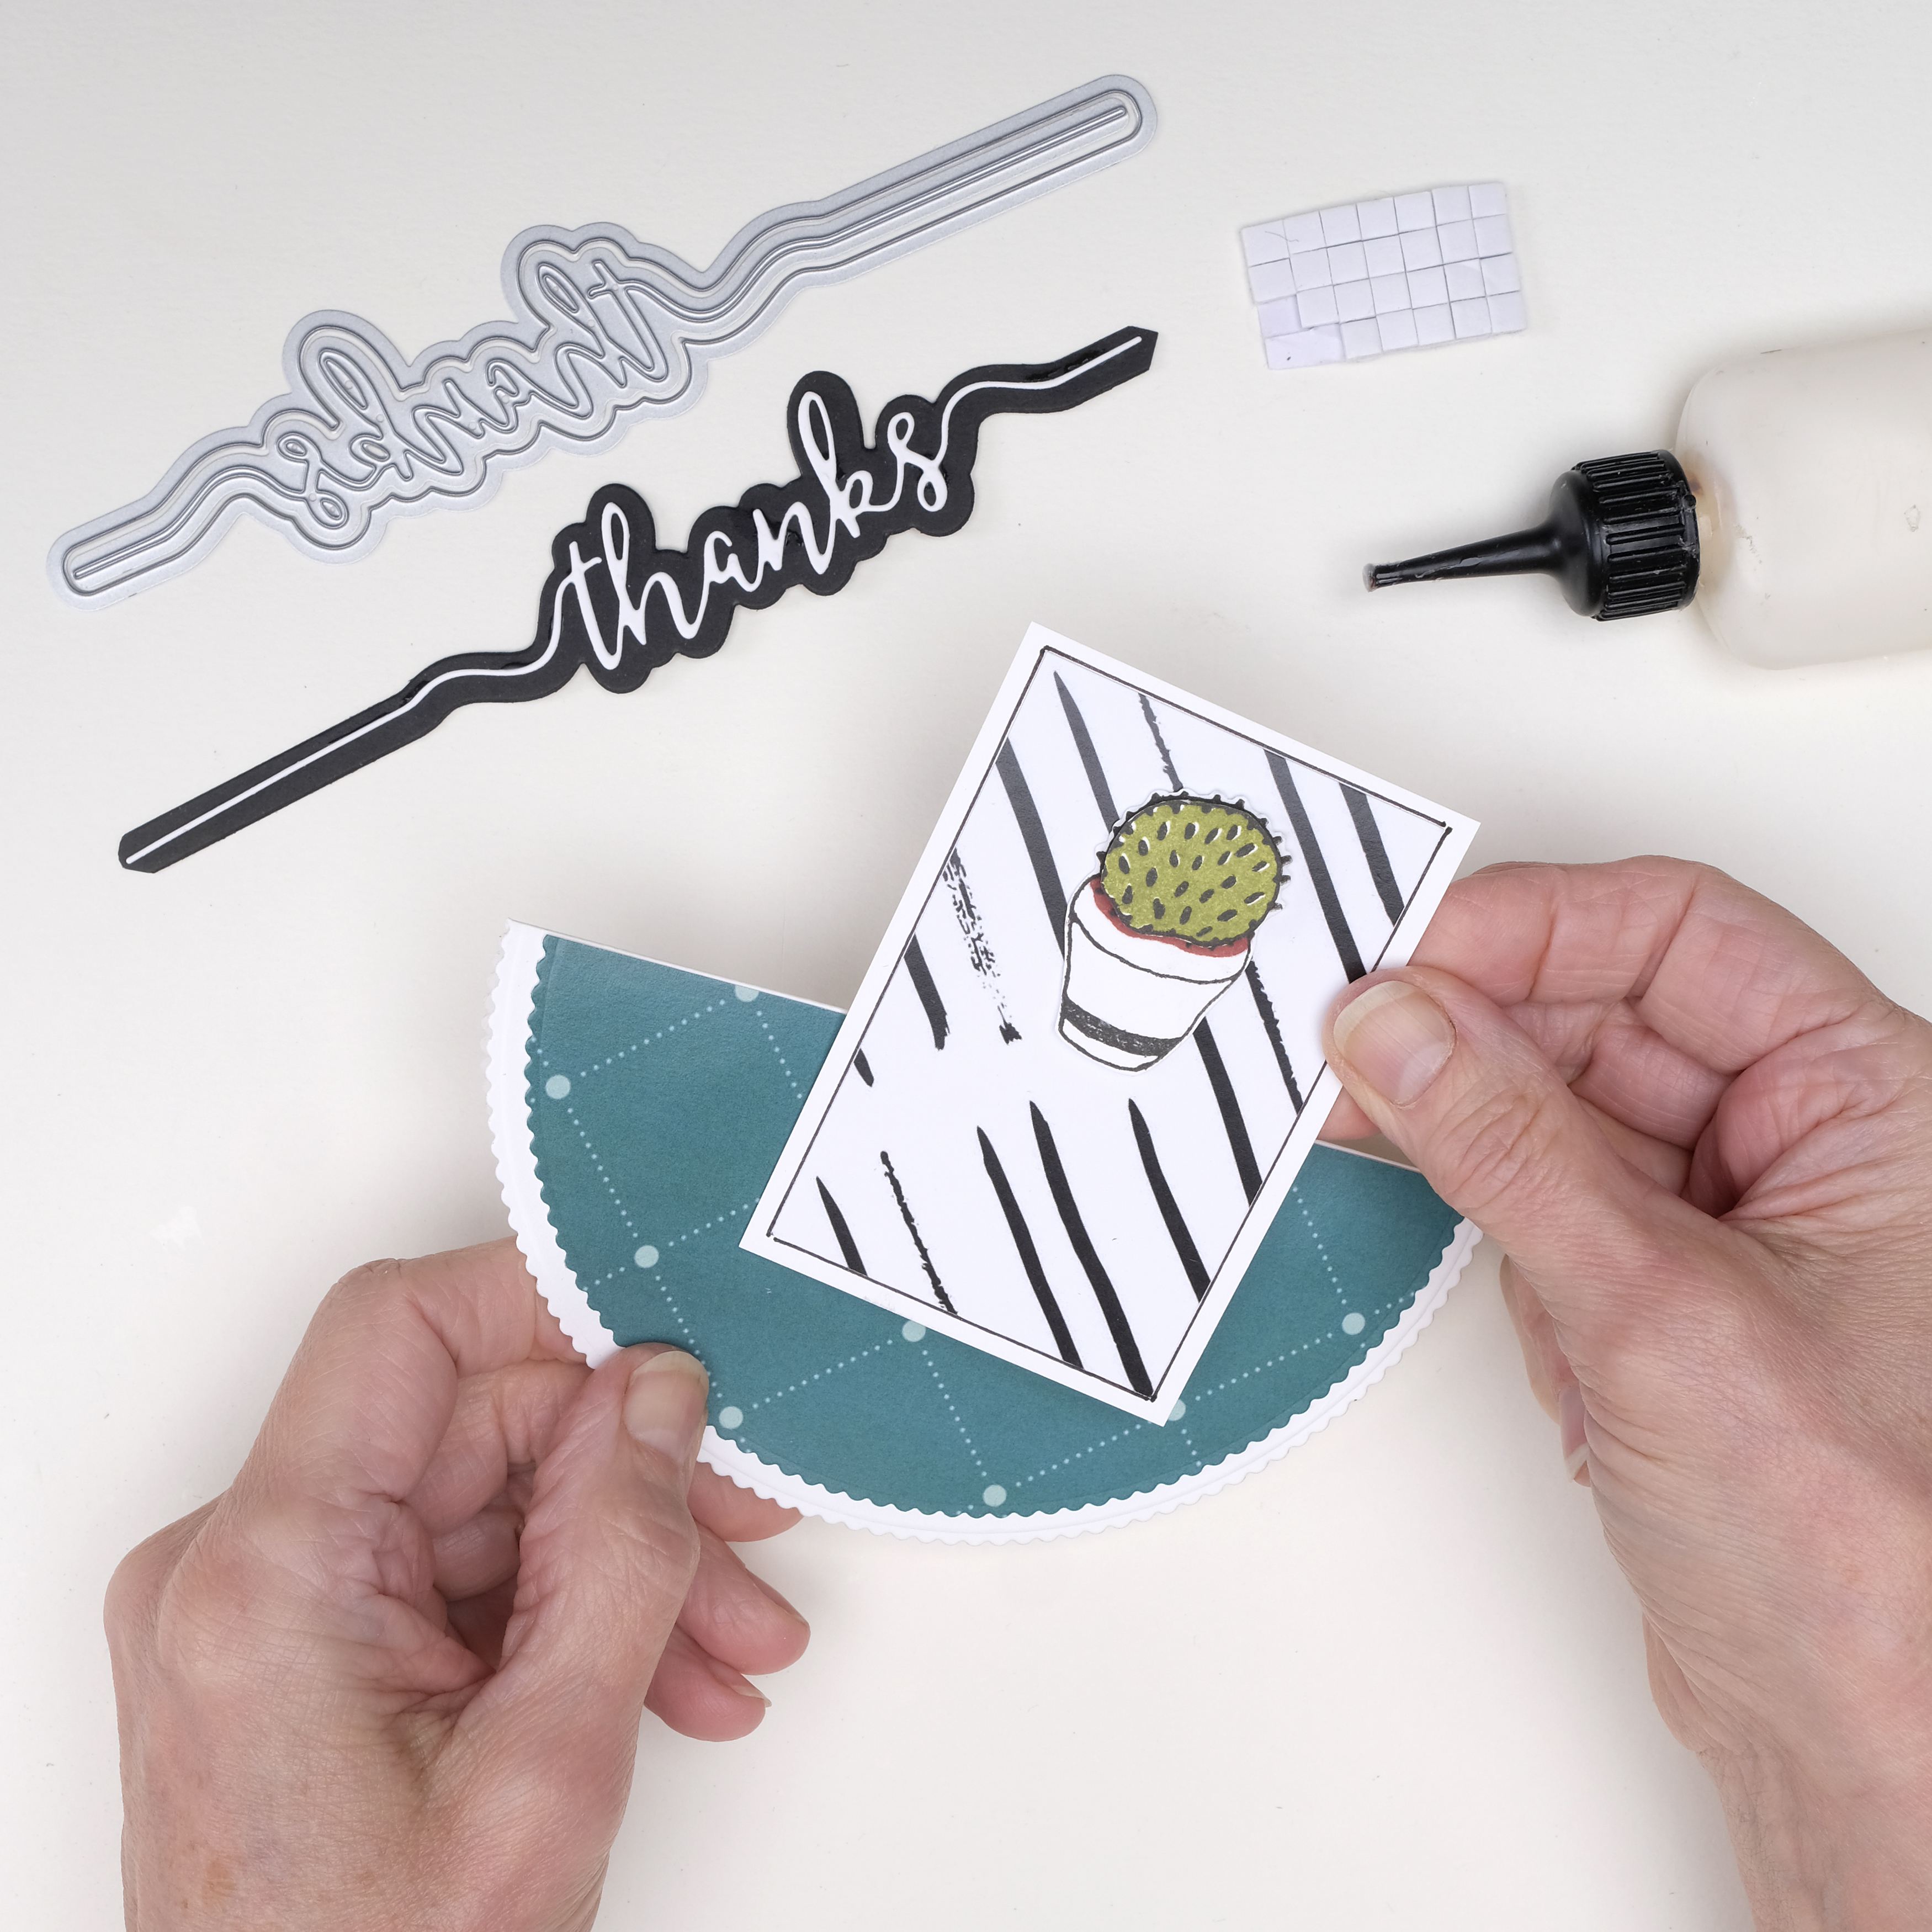 How to make a rocking card, card 1 – step 3